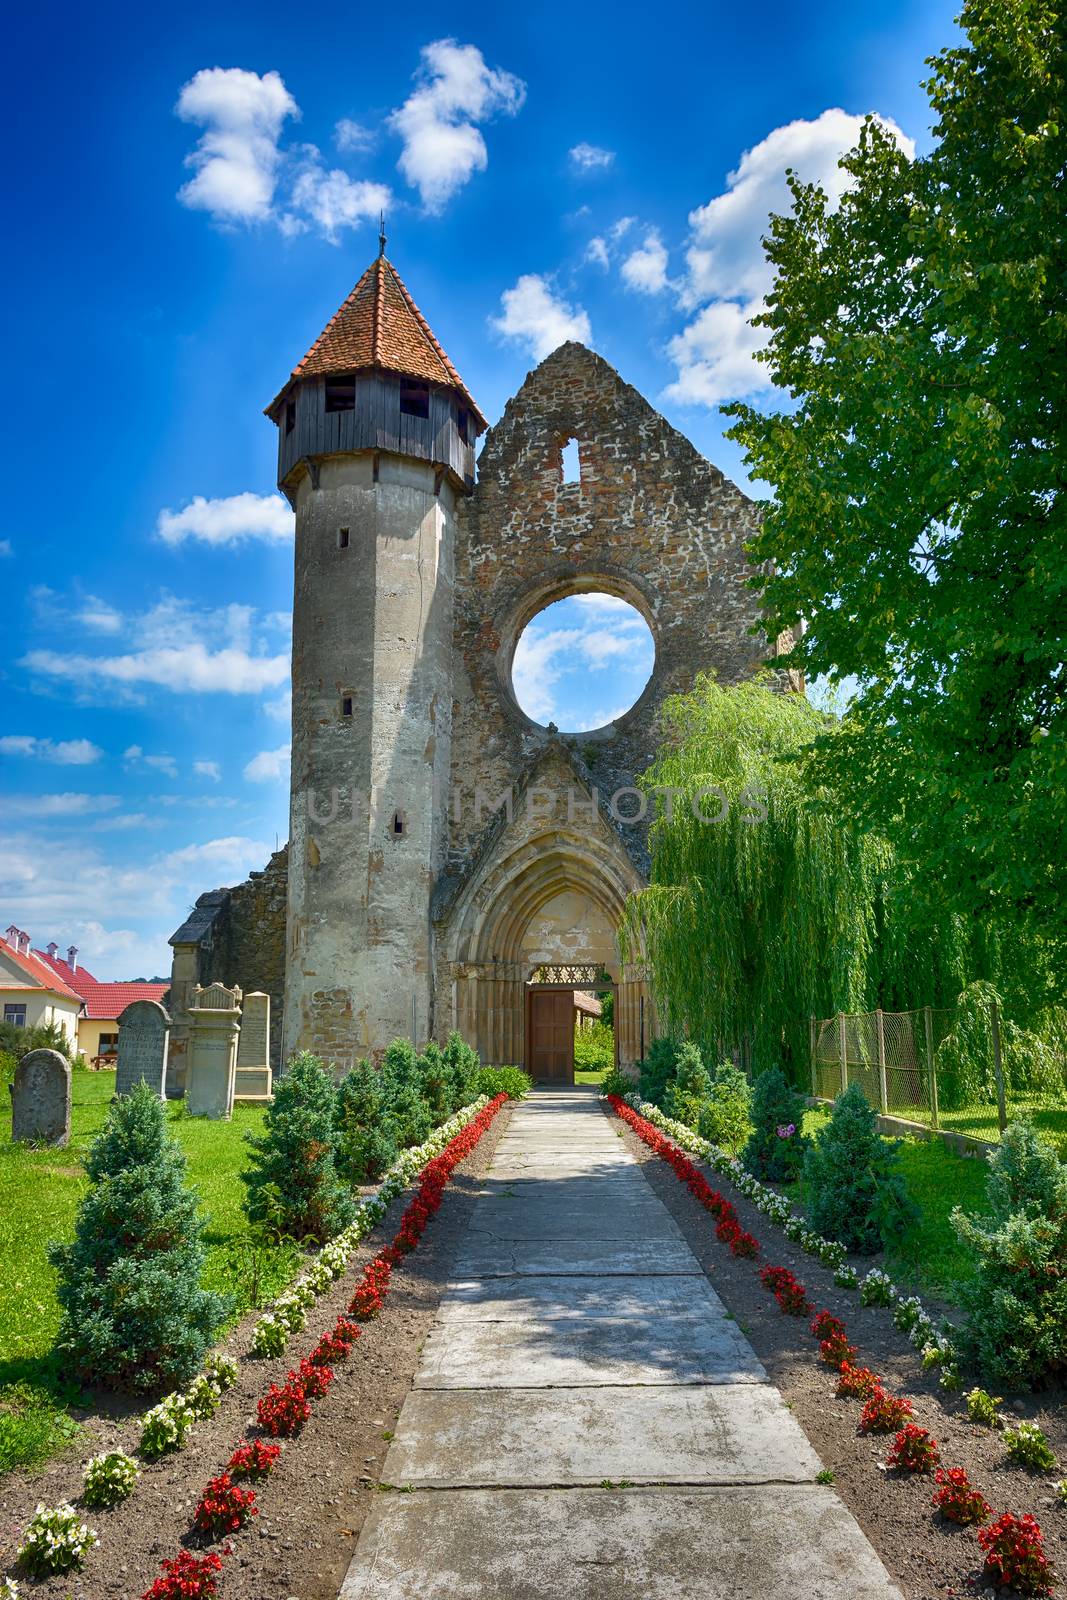 Cârţa Monastery is a former Cistercian (Benedictine) monastery in the Ţara Făgăraşului region in southern Transylvania. The monastery was probably founded in 1202-1206 by monks from Igriș abbey (daughter house of Pontigny abbey)